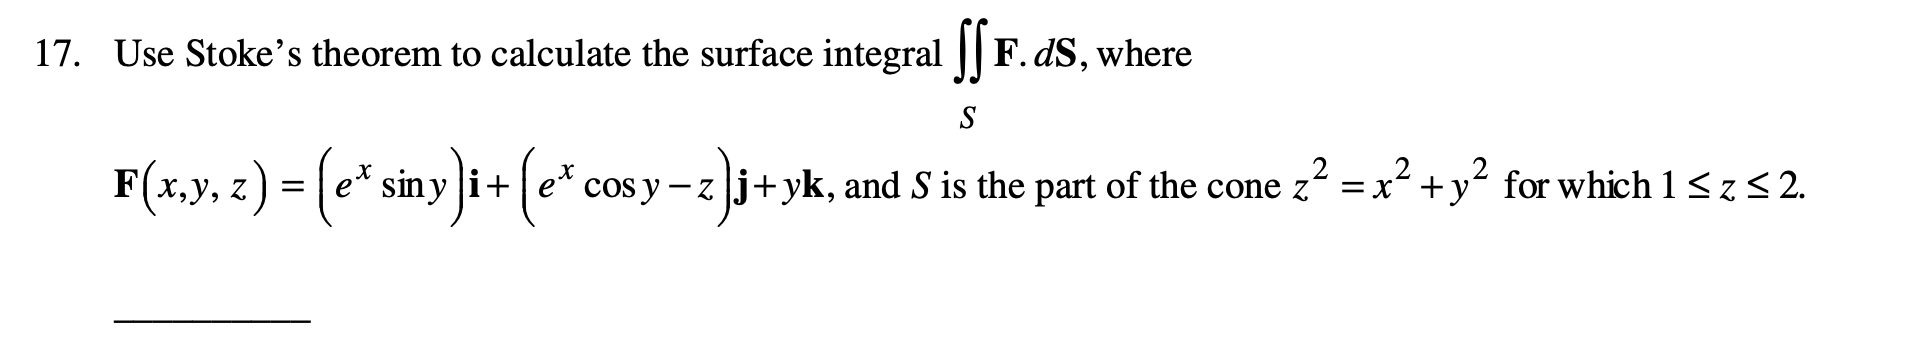 Use Stoke's theorem to calculate the surface integral || F. dS, where
S
F(x,y. =) = (* siny)i+ (e*
.2
cos y - z j+yk, and S is the part of the cone z
х,у,
siny i+
=x² +y' for which 1<z< 2.
